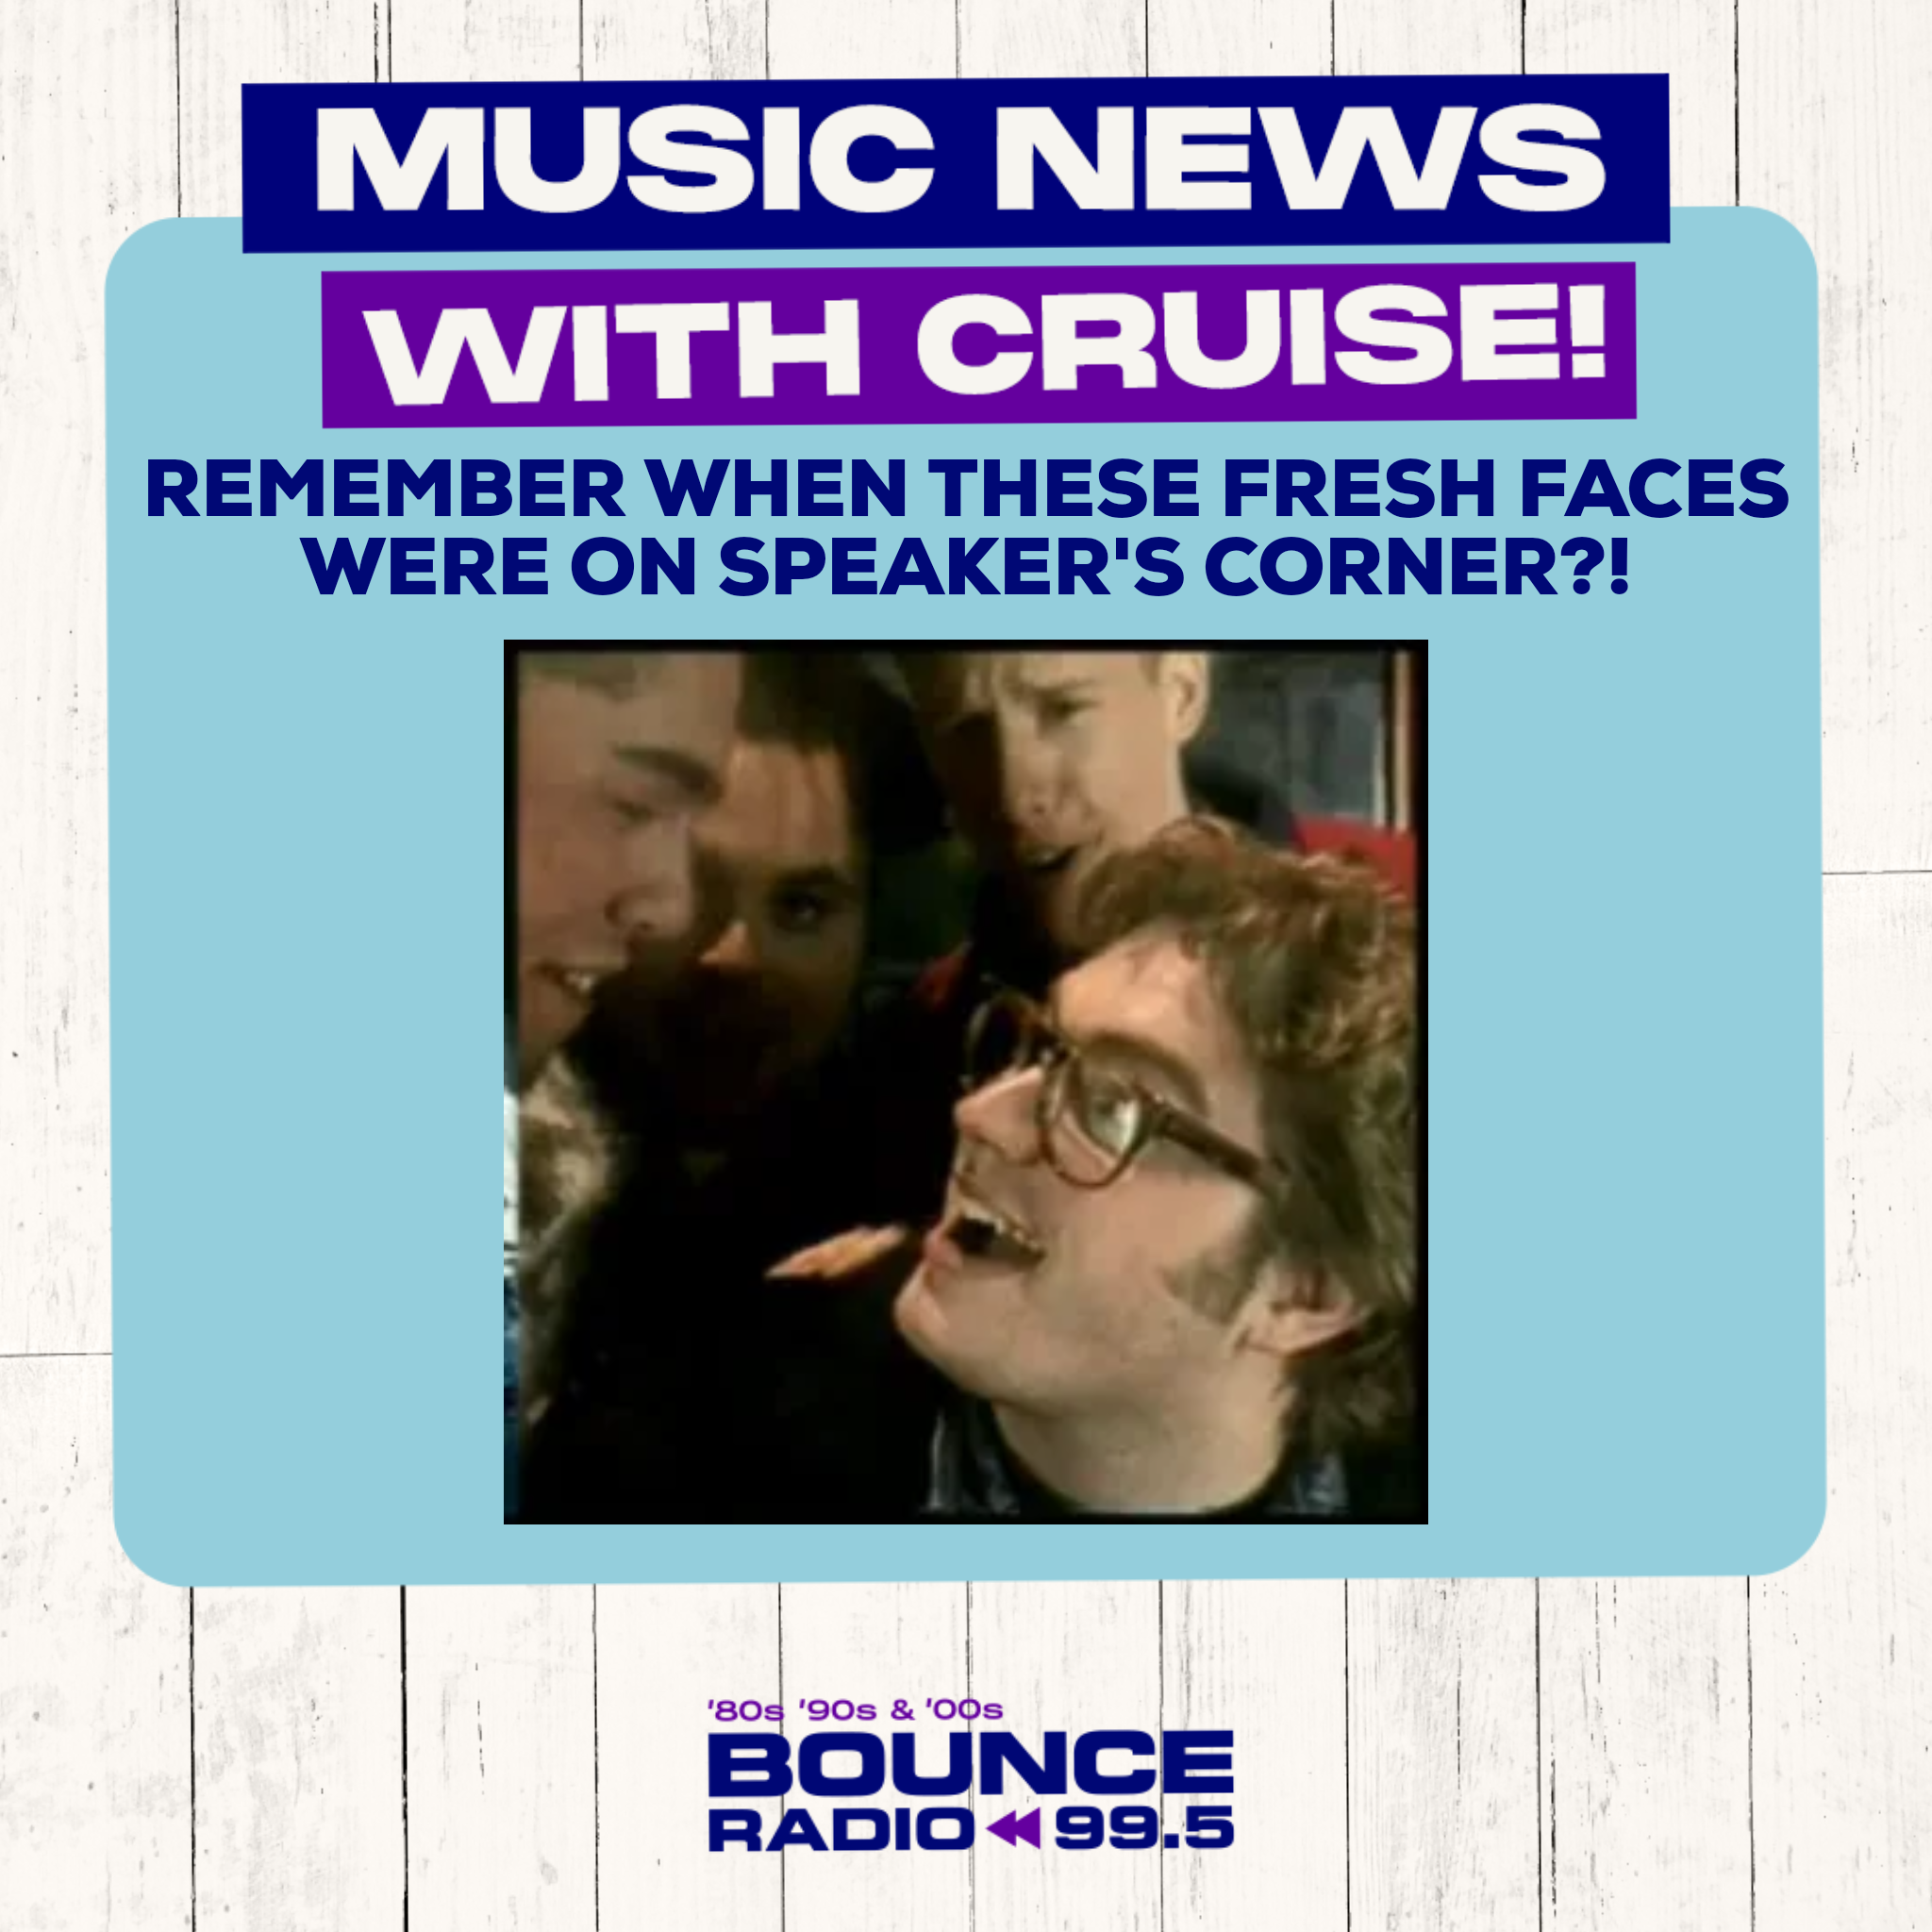 Music News with Cruise - Wednesday July 28th